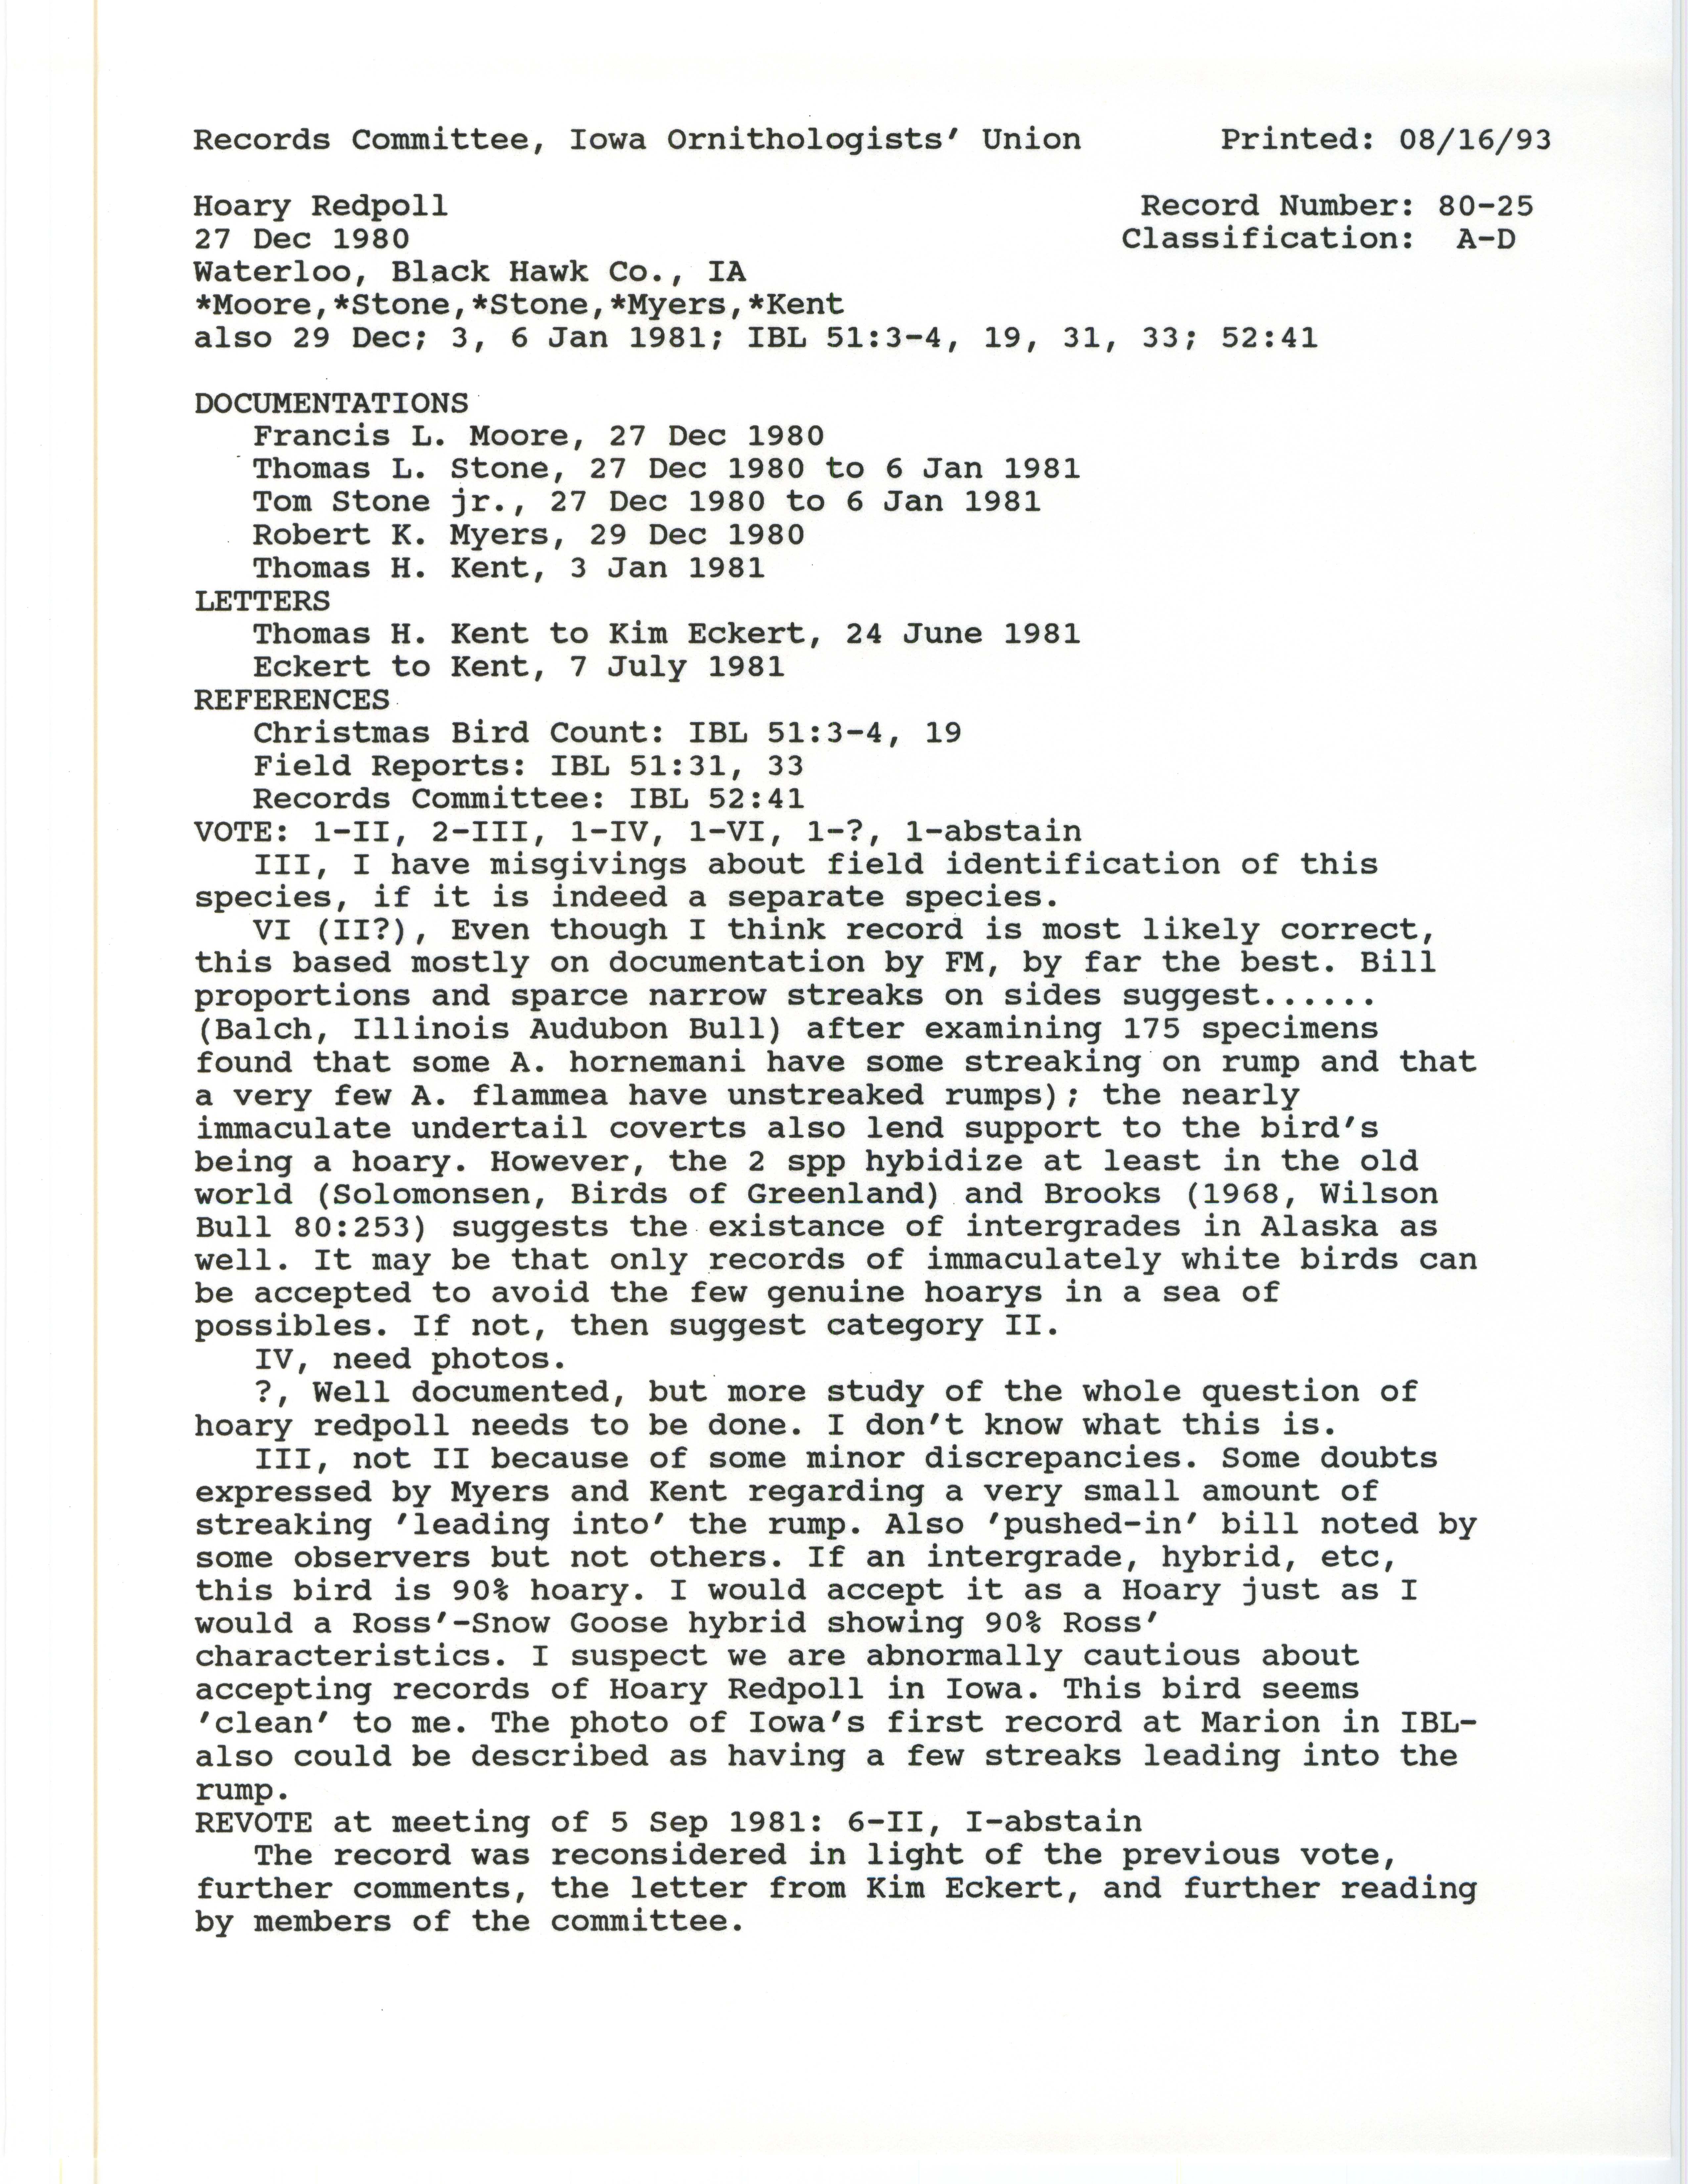 Records Committee review for rare bird sighting for Hoary Redpoll at Waterloo, 1980